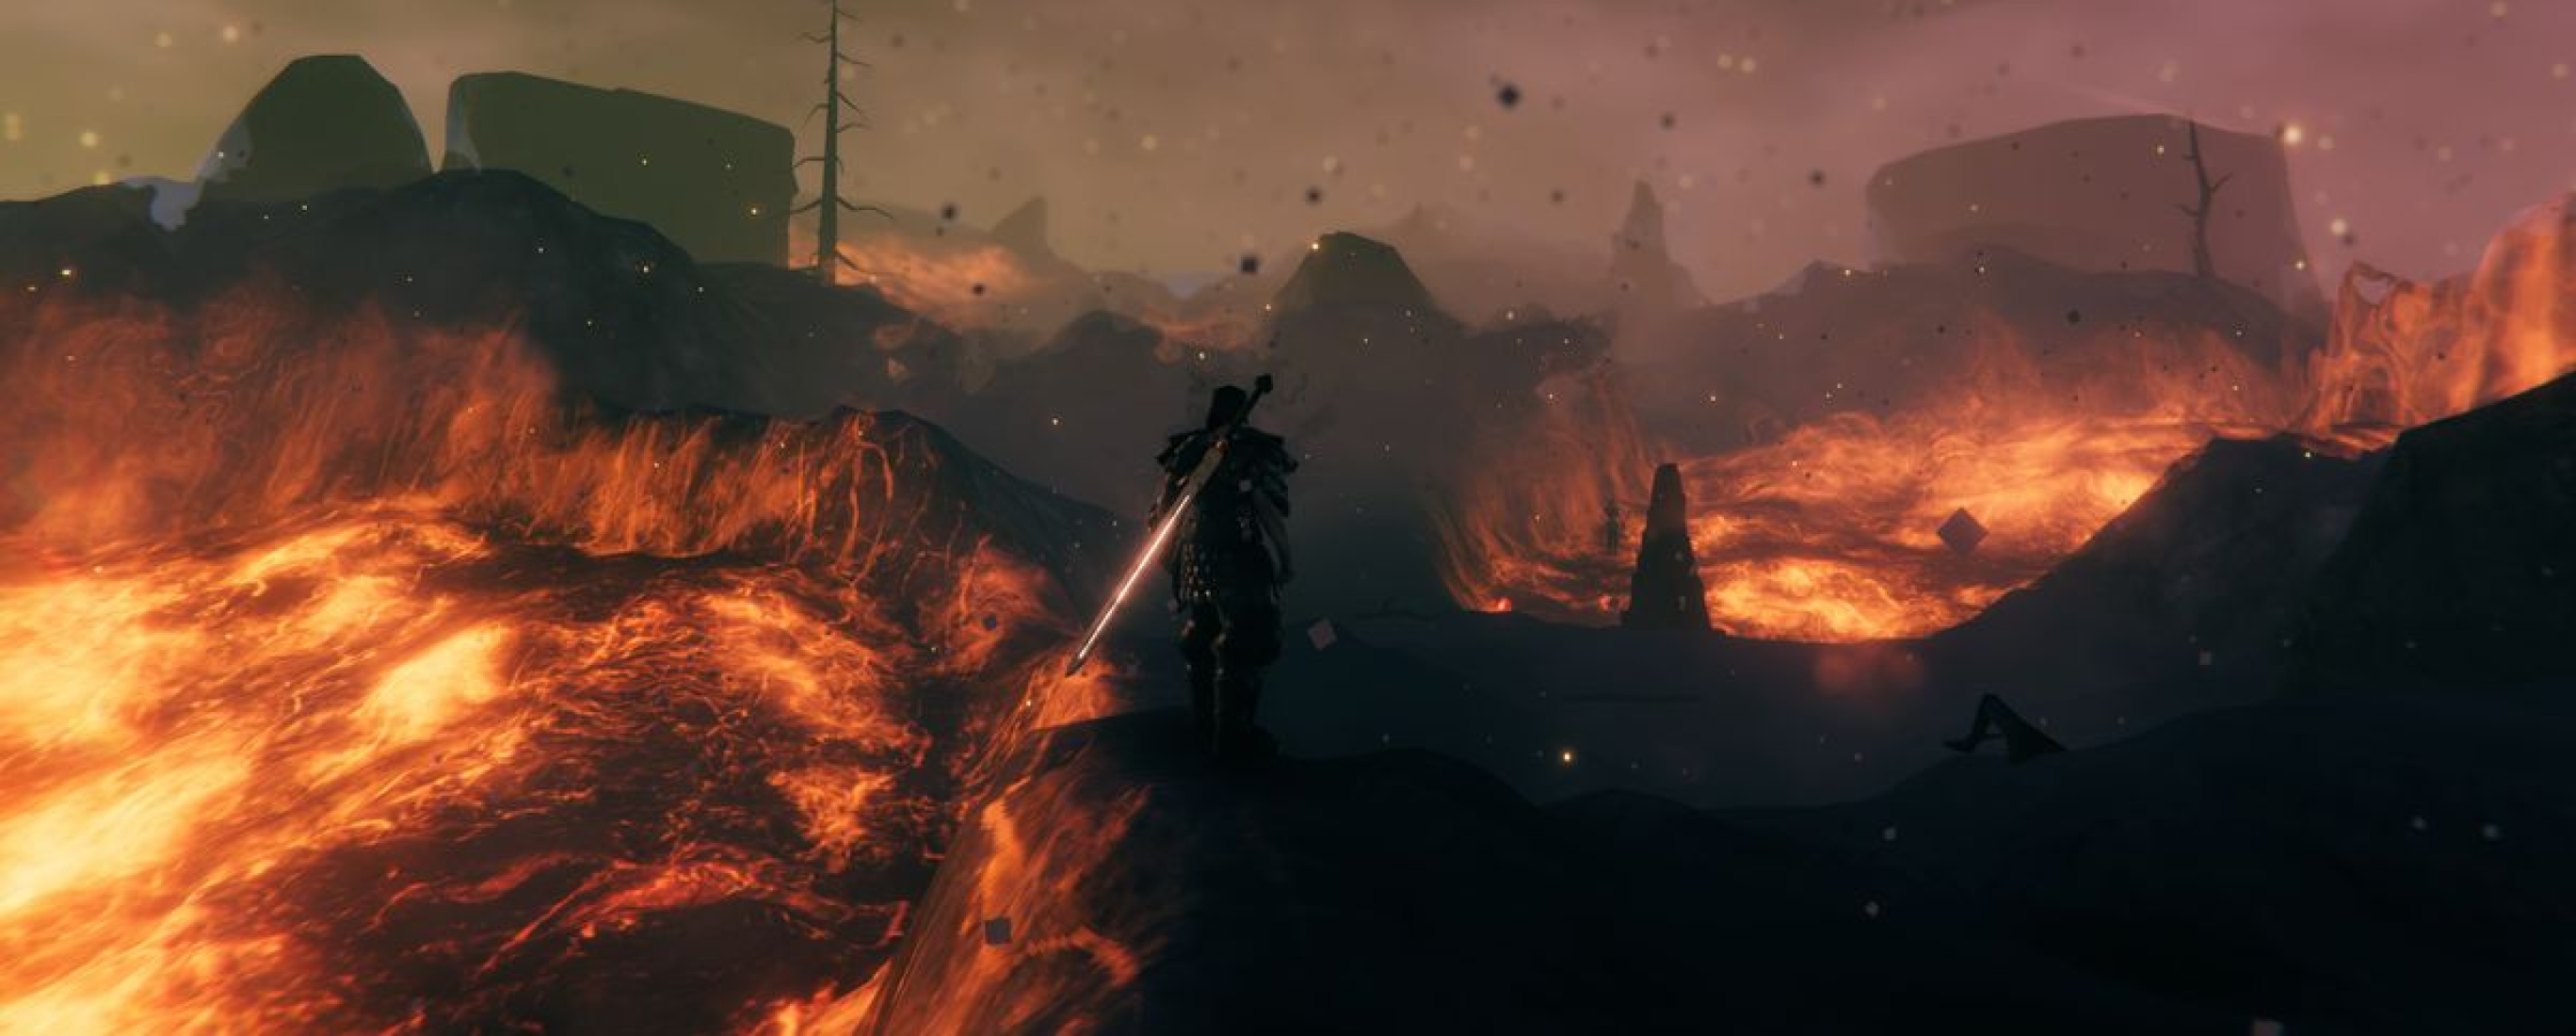 Hero balancing between two lava pits in valheims Ashlands.